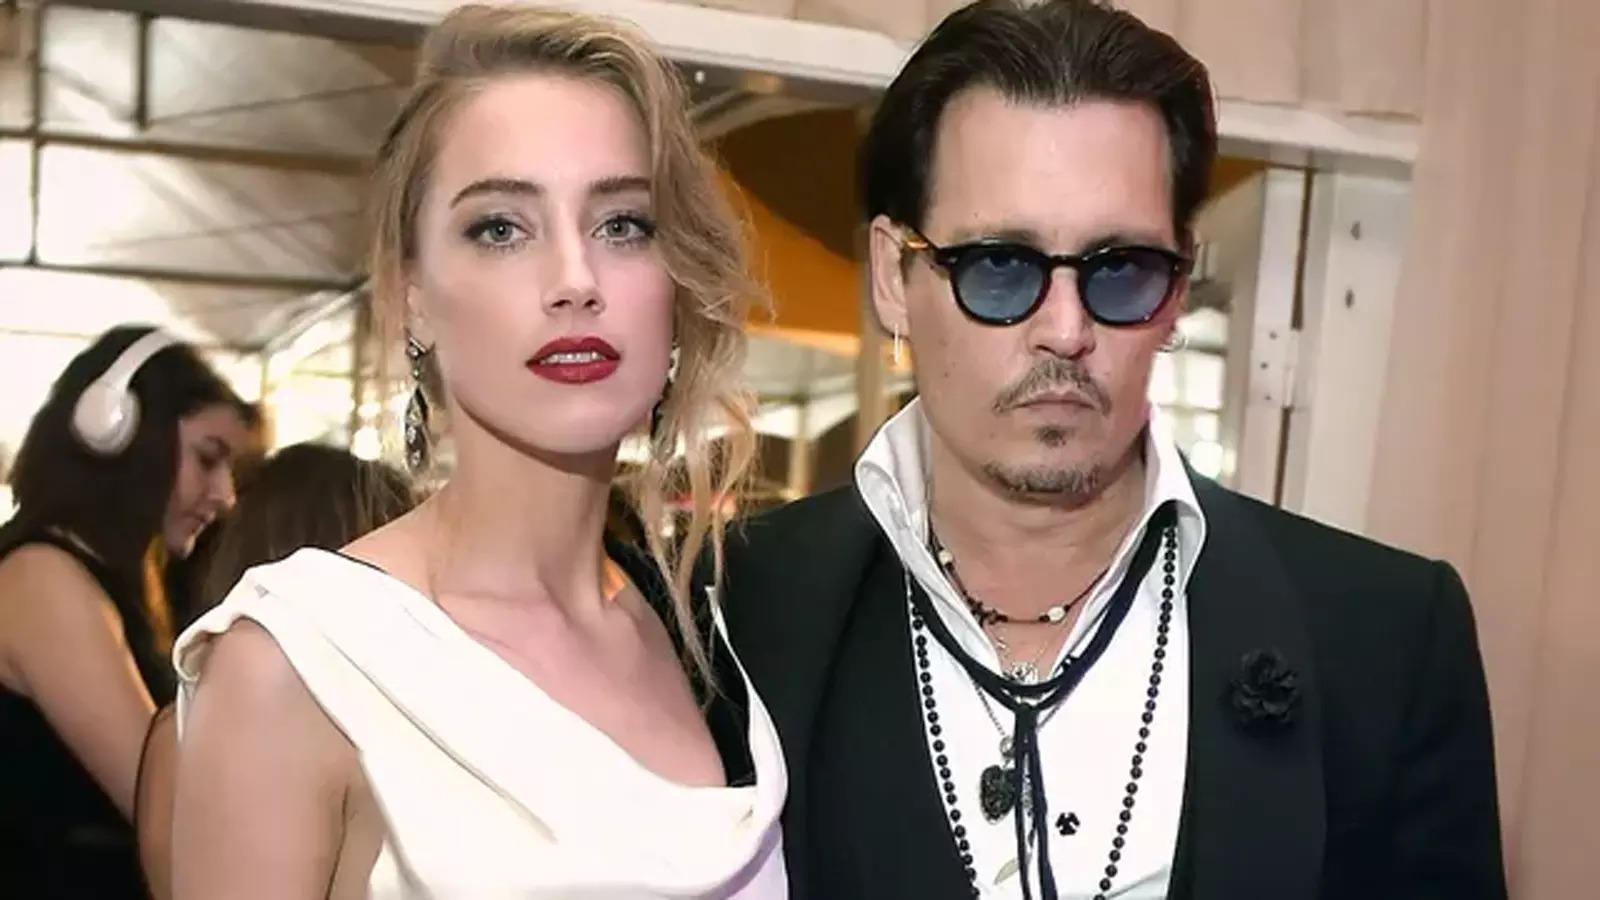 Johnny Depp case: Now, Amber Heard’s insurance company refuses to cover her damages owing to ‘wilful’ defamation | English Movie News – Hollywood